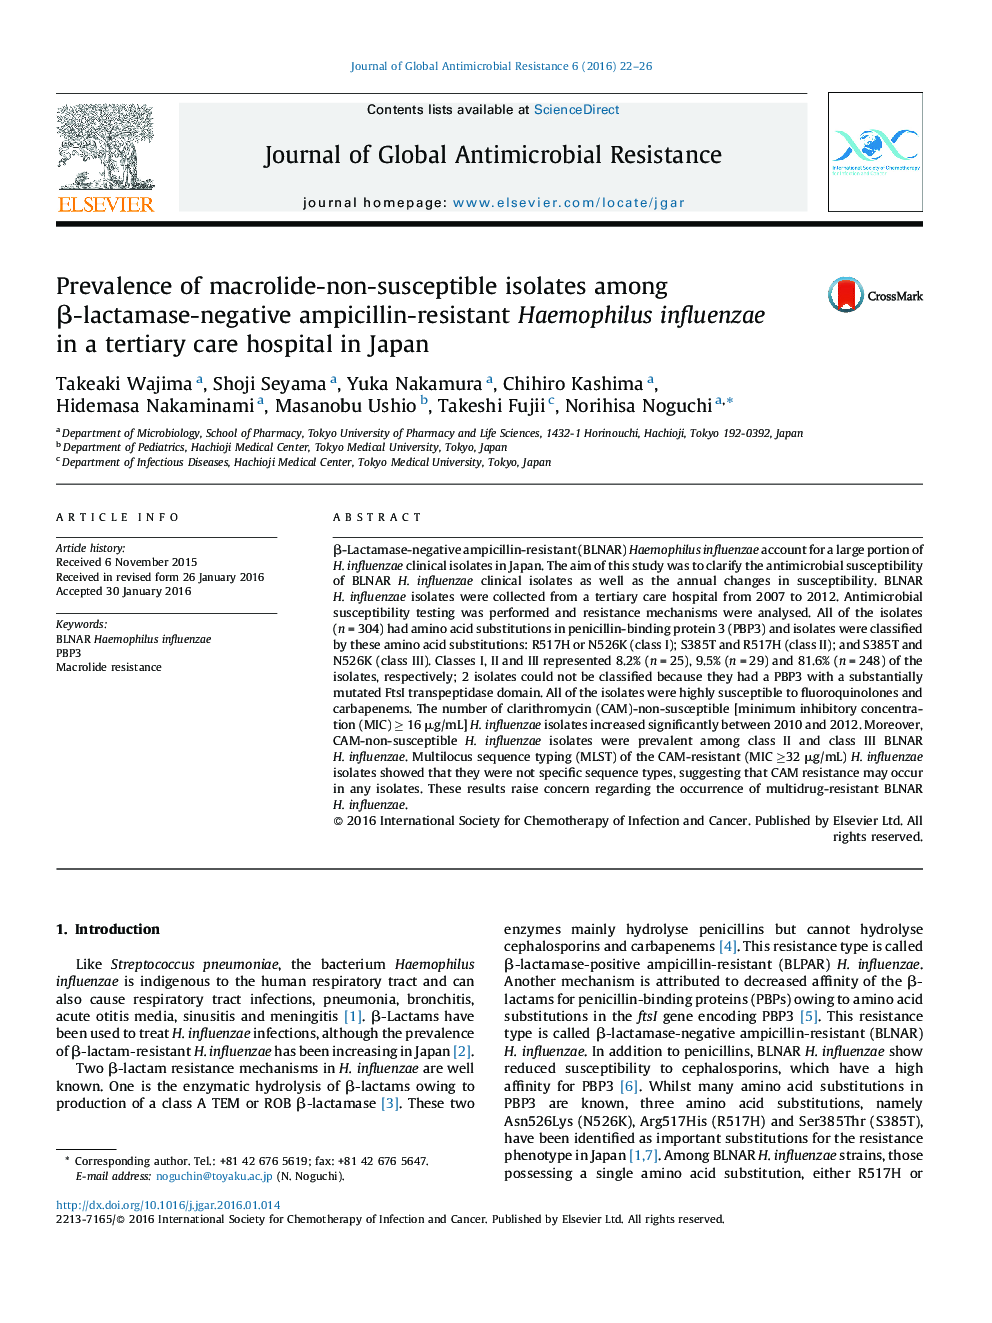 Prevalence of macrolide-non-susceptible isolates among Î²-lactamase-negative ampicillin-resistant Haemophilus influenzae in a tertiary care hospital in Japan